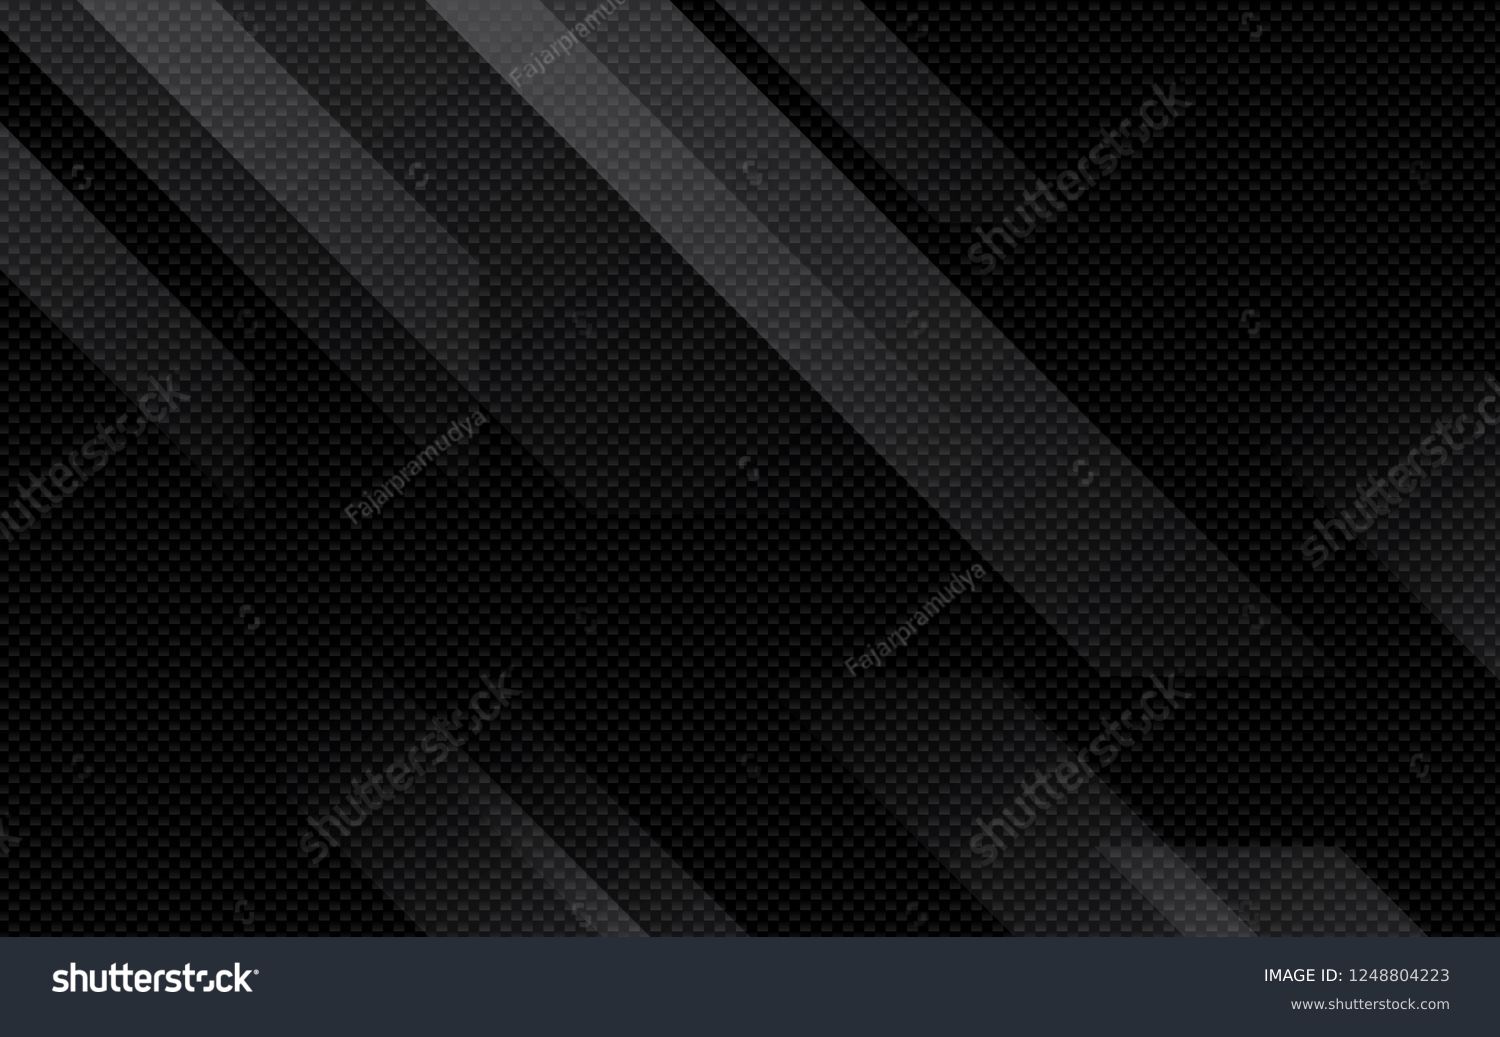 Black abstract geometric background. Modern shape concept. #1248804223